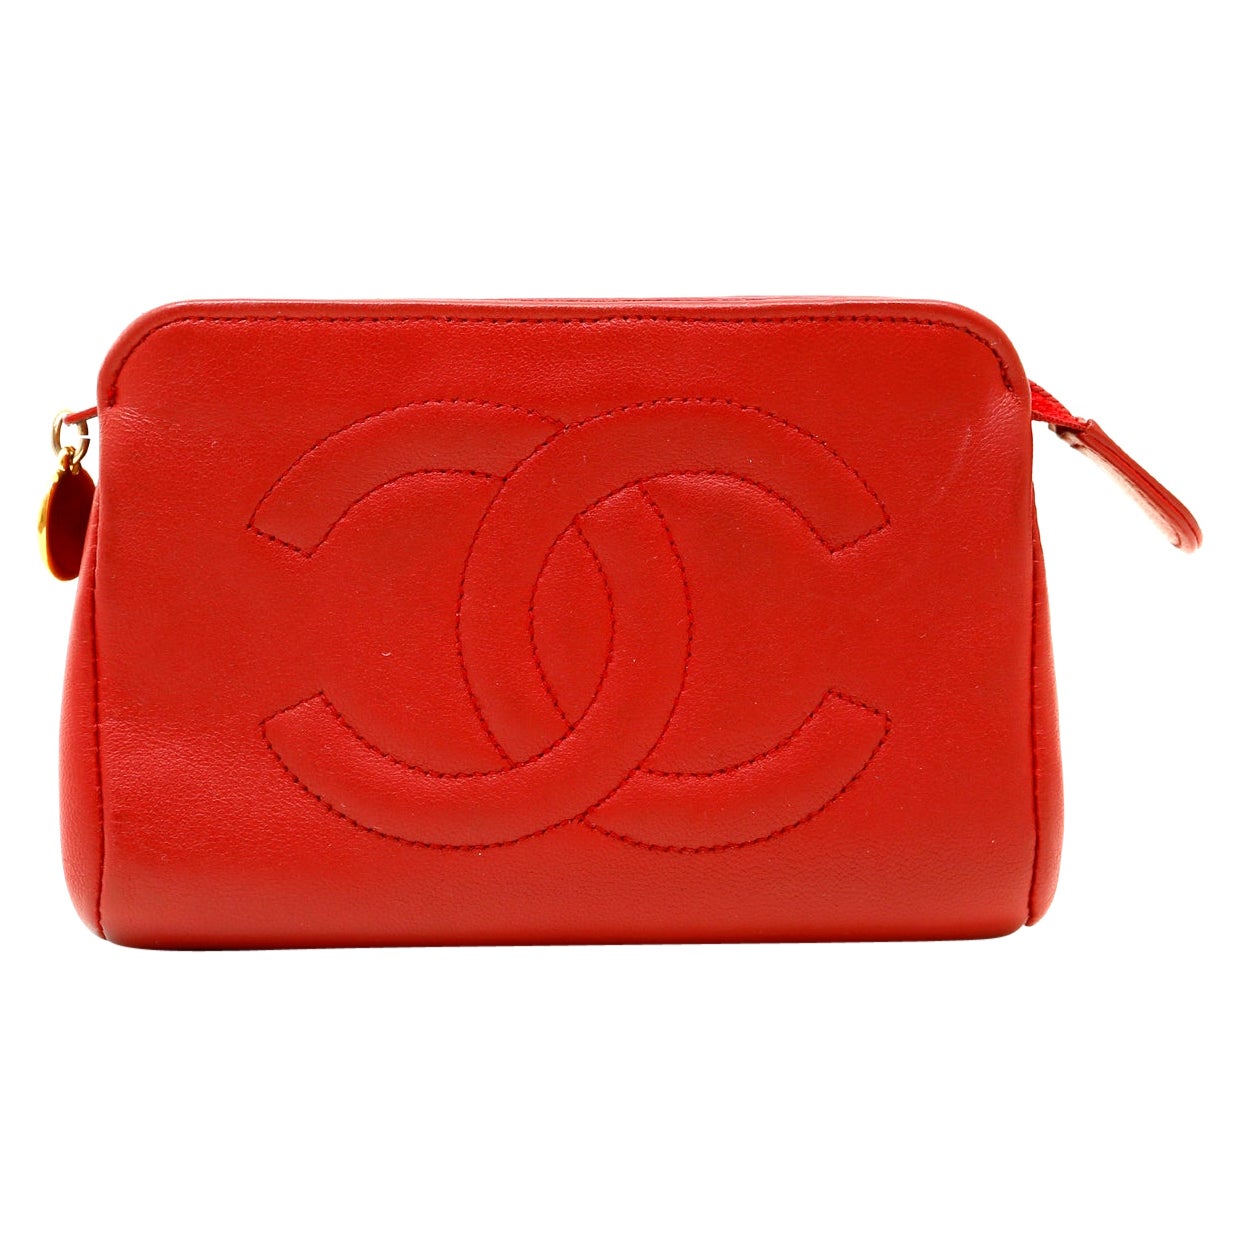 Chanel Red Leather Coin Purse